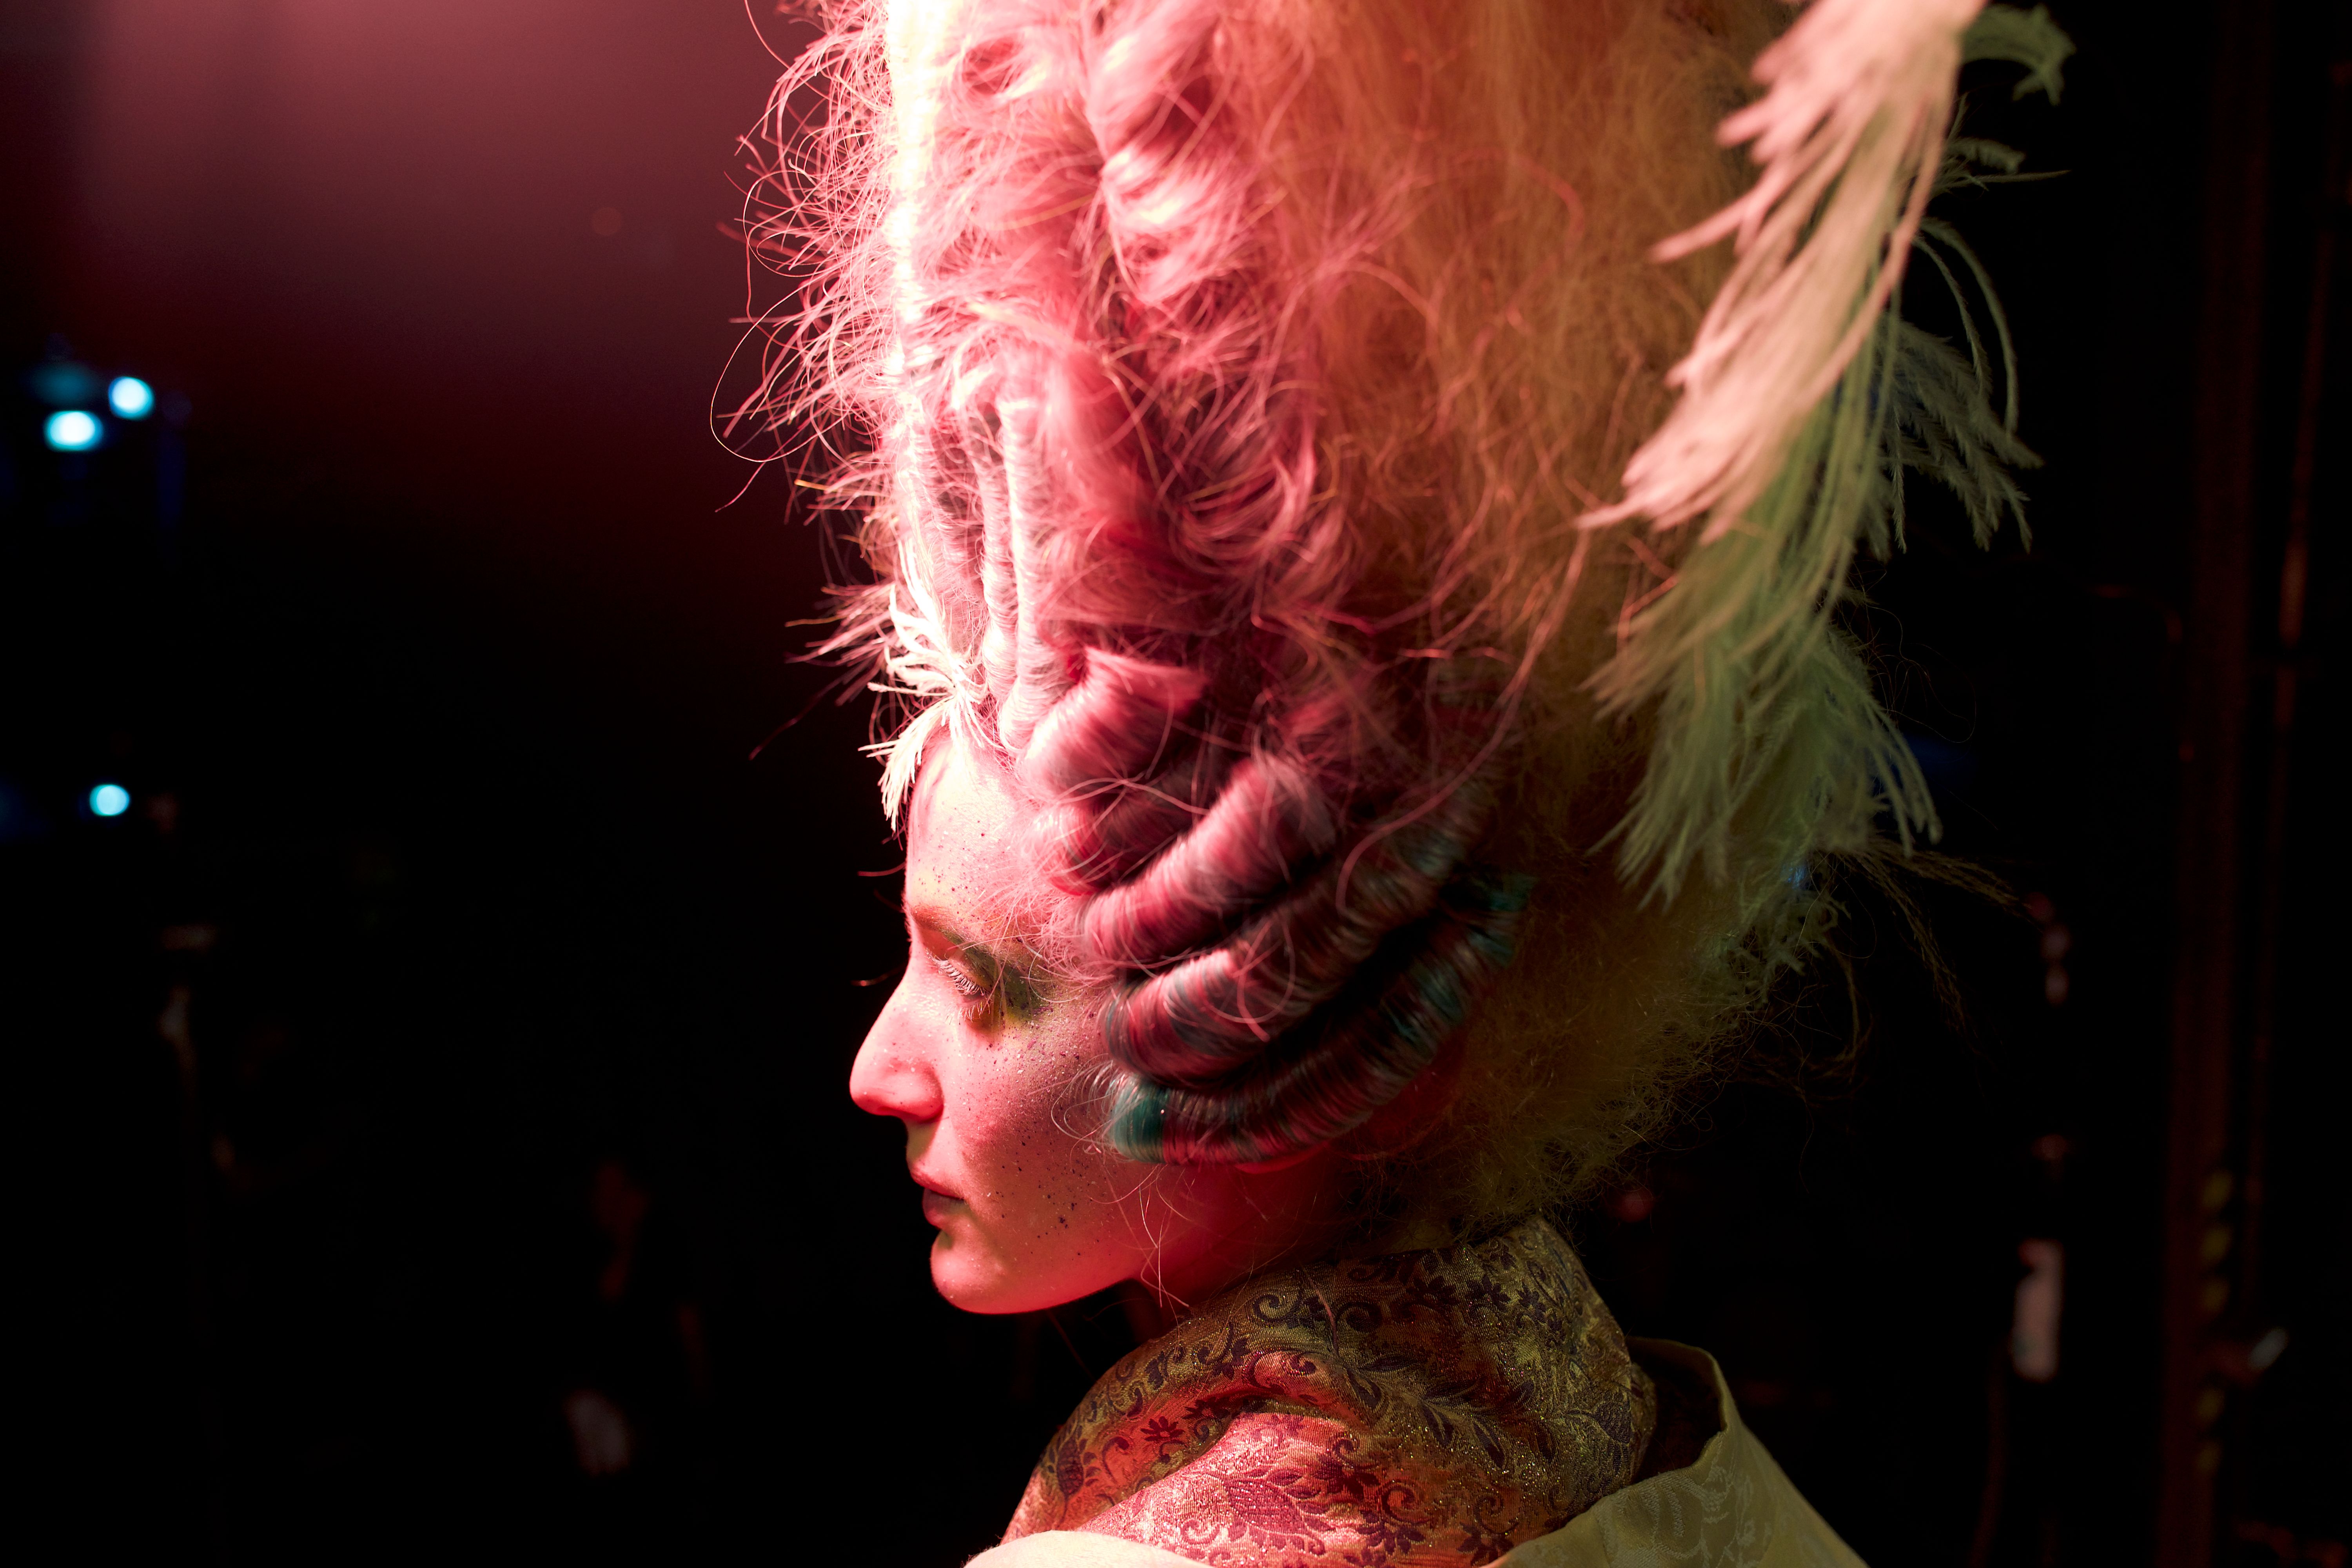 A model in an incredibly elaborate vertical hairdo sits under lights that turn her bright pink and yellow in a shot from A24’s Medusa Deluxe